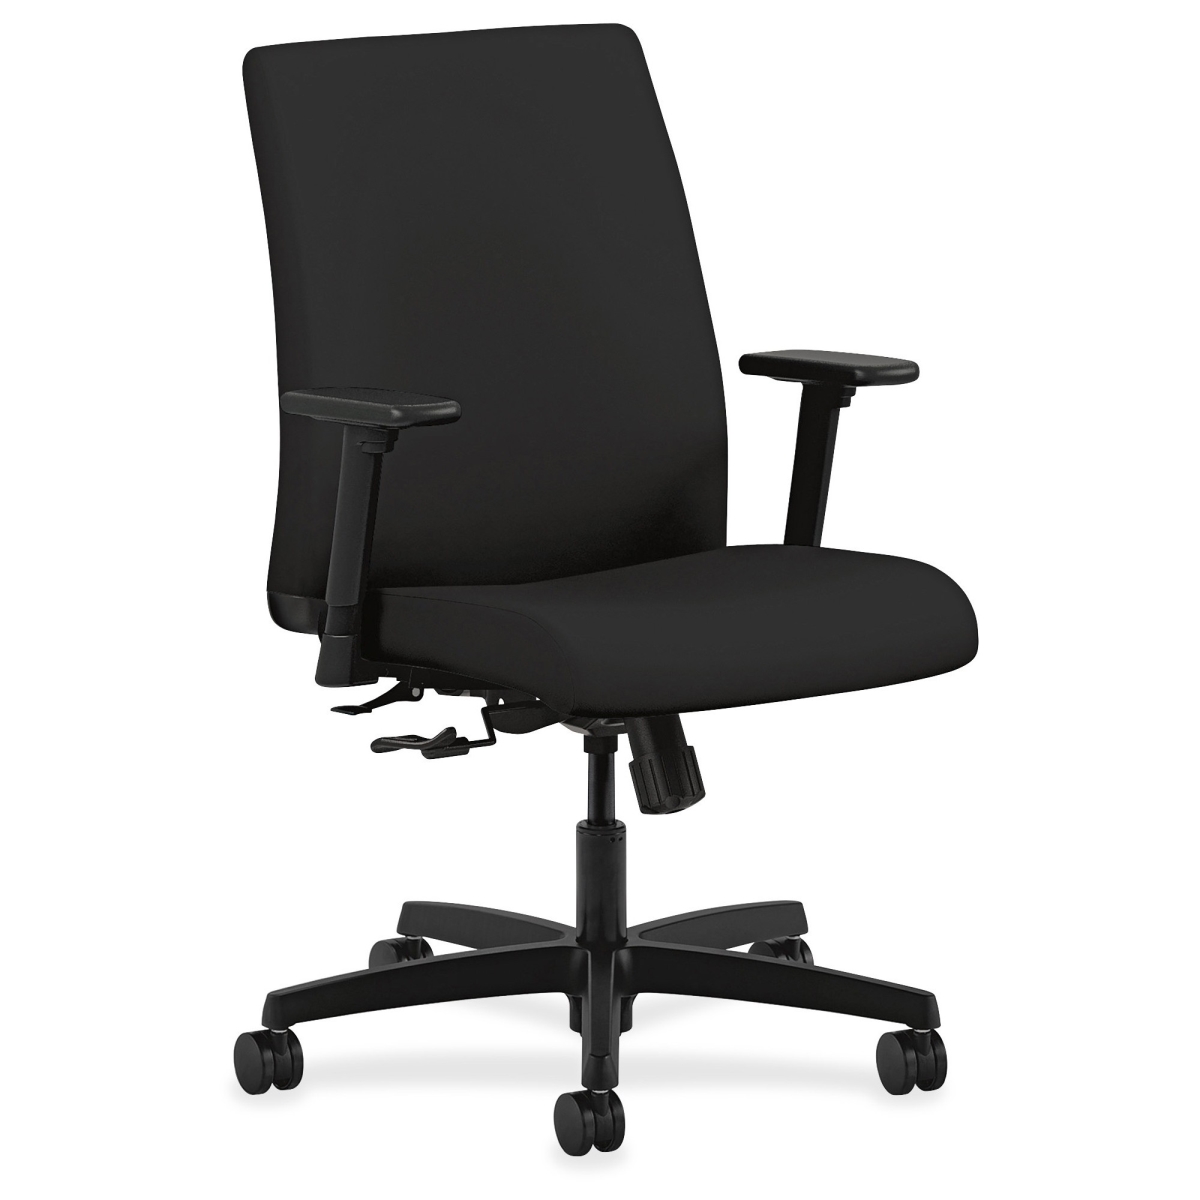 Hon Company It105cu10 Ignition Series Low-back Task Chair